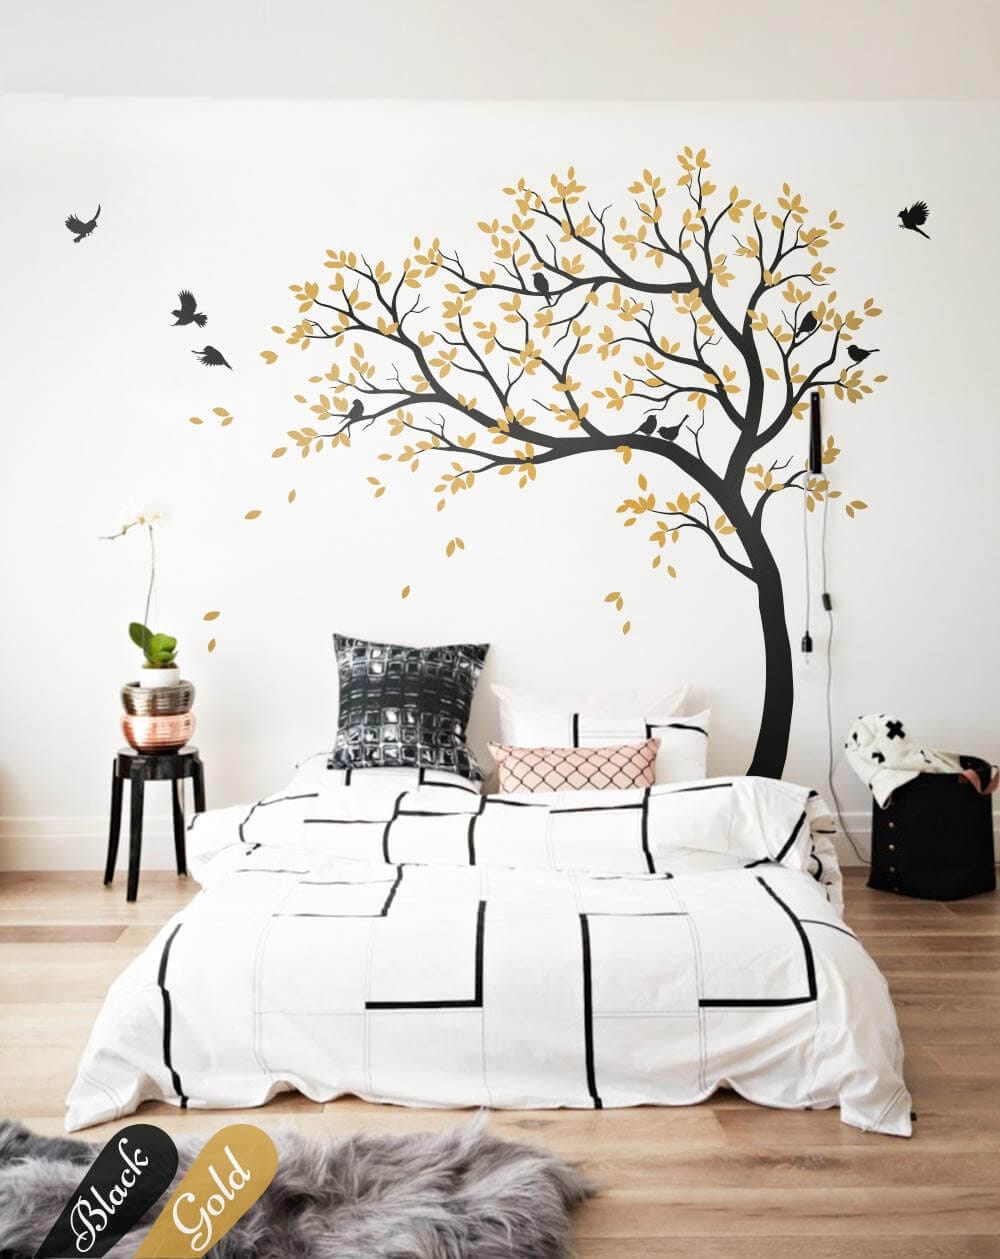 wall mural ideas for bedroom